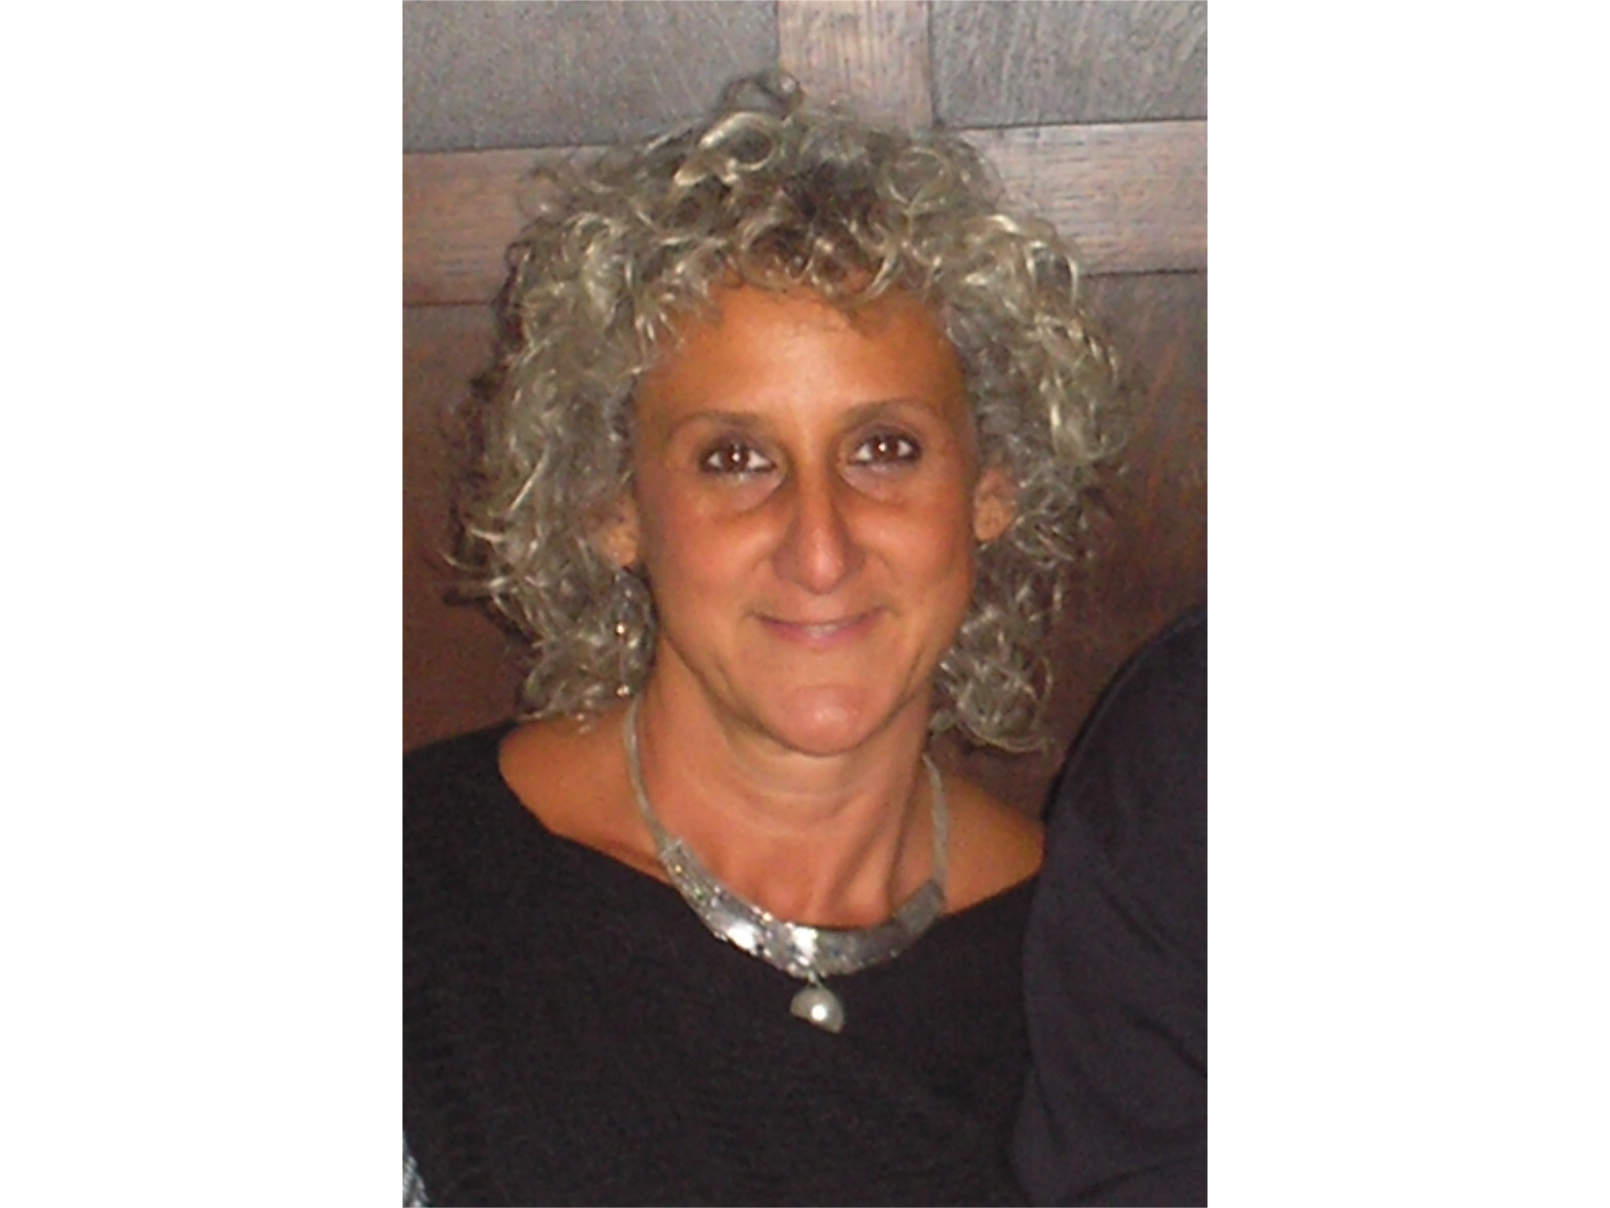 Joyce Dalsheim: Cultural Anthropologist Researching Nationalism, Religion, and the Israel/Palestine Conflict